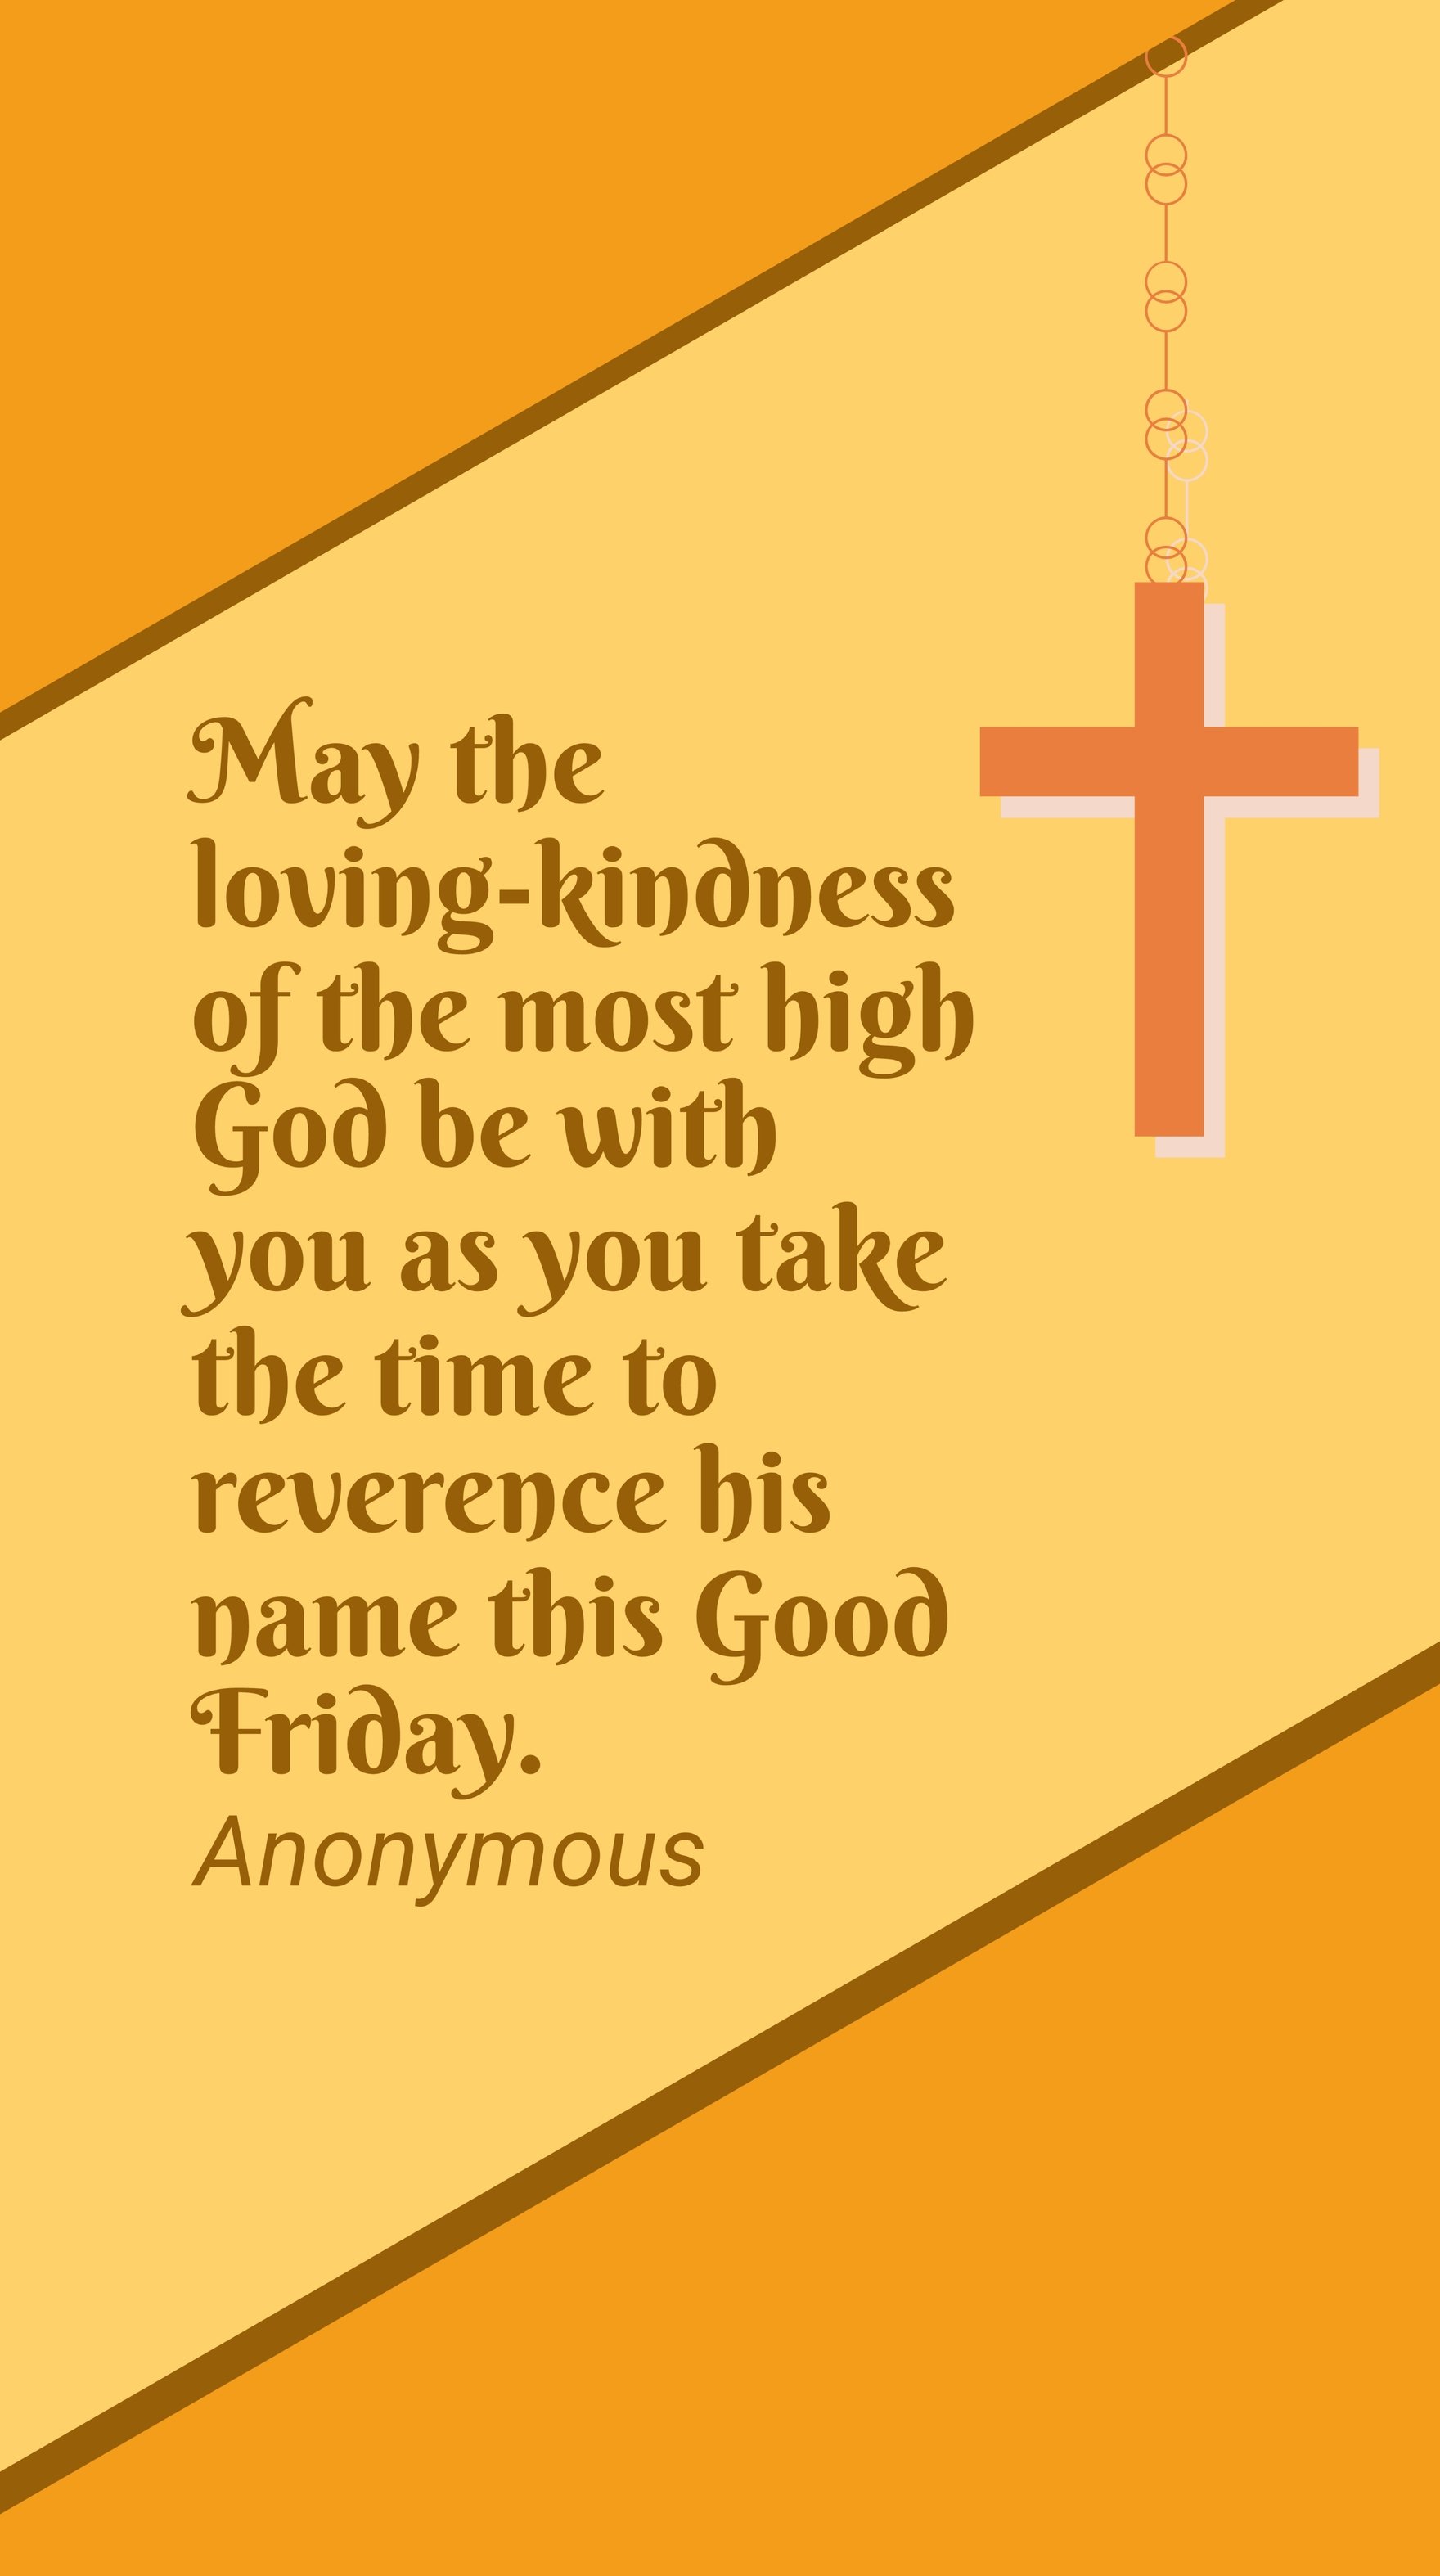 Anonymous - May the loving-kindness of the most high God be with you as you take the time to reverence his name this Good Friday. in JPG